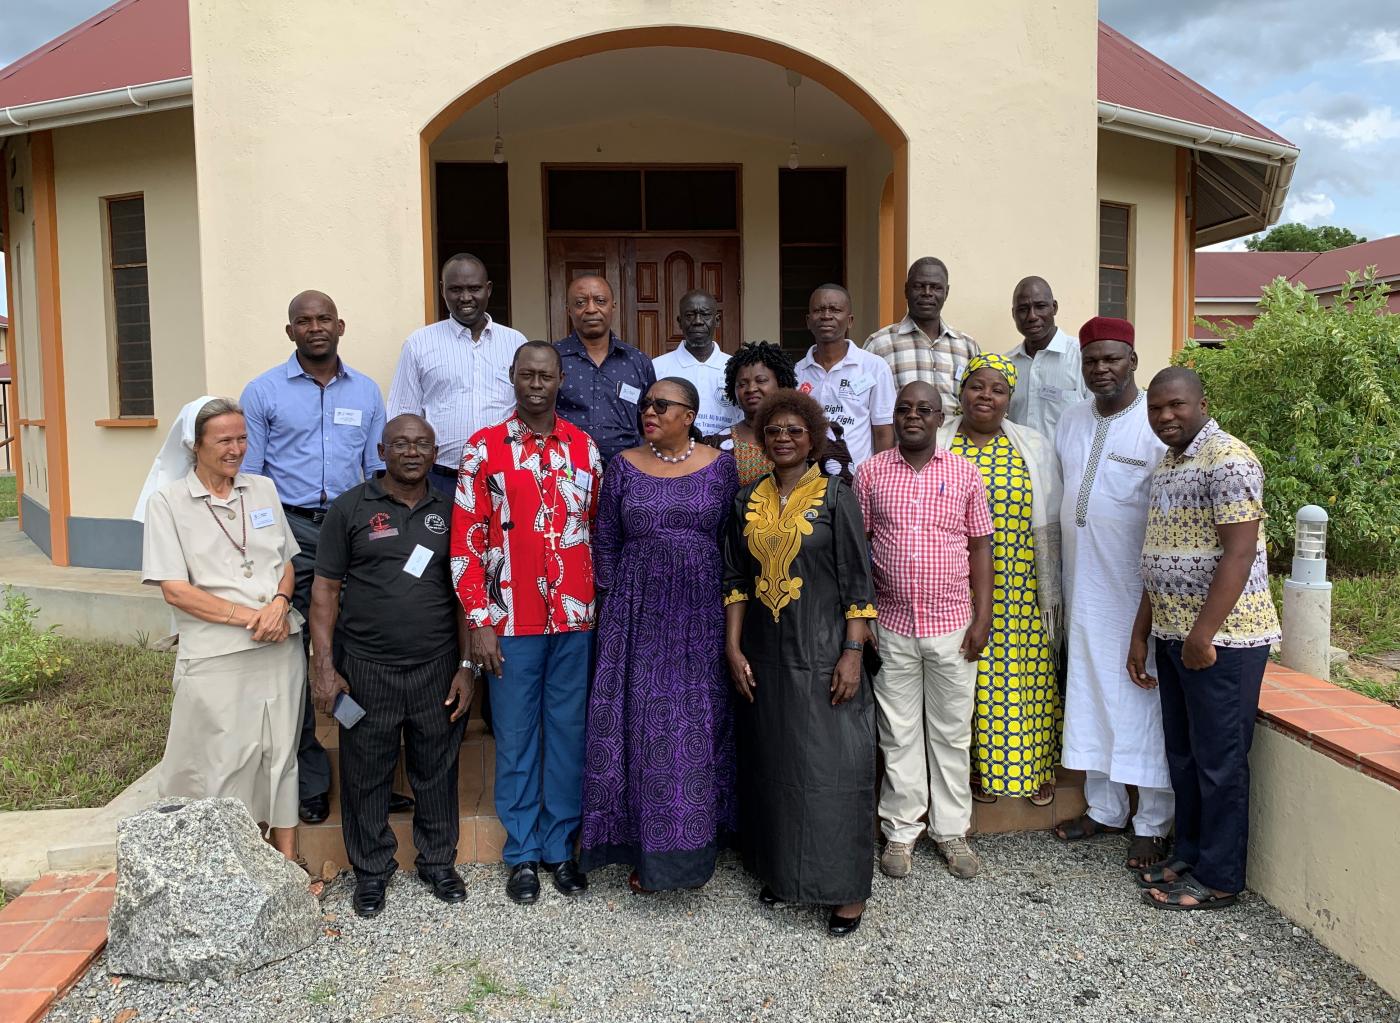 WCC workshop on trauma healing gathered participants from Nigeria, Sierra Leone and South Sudan. Photo: WCC